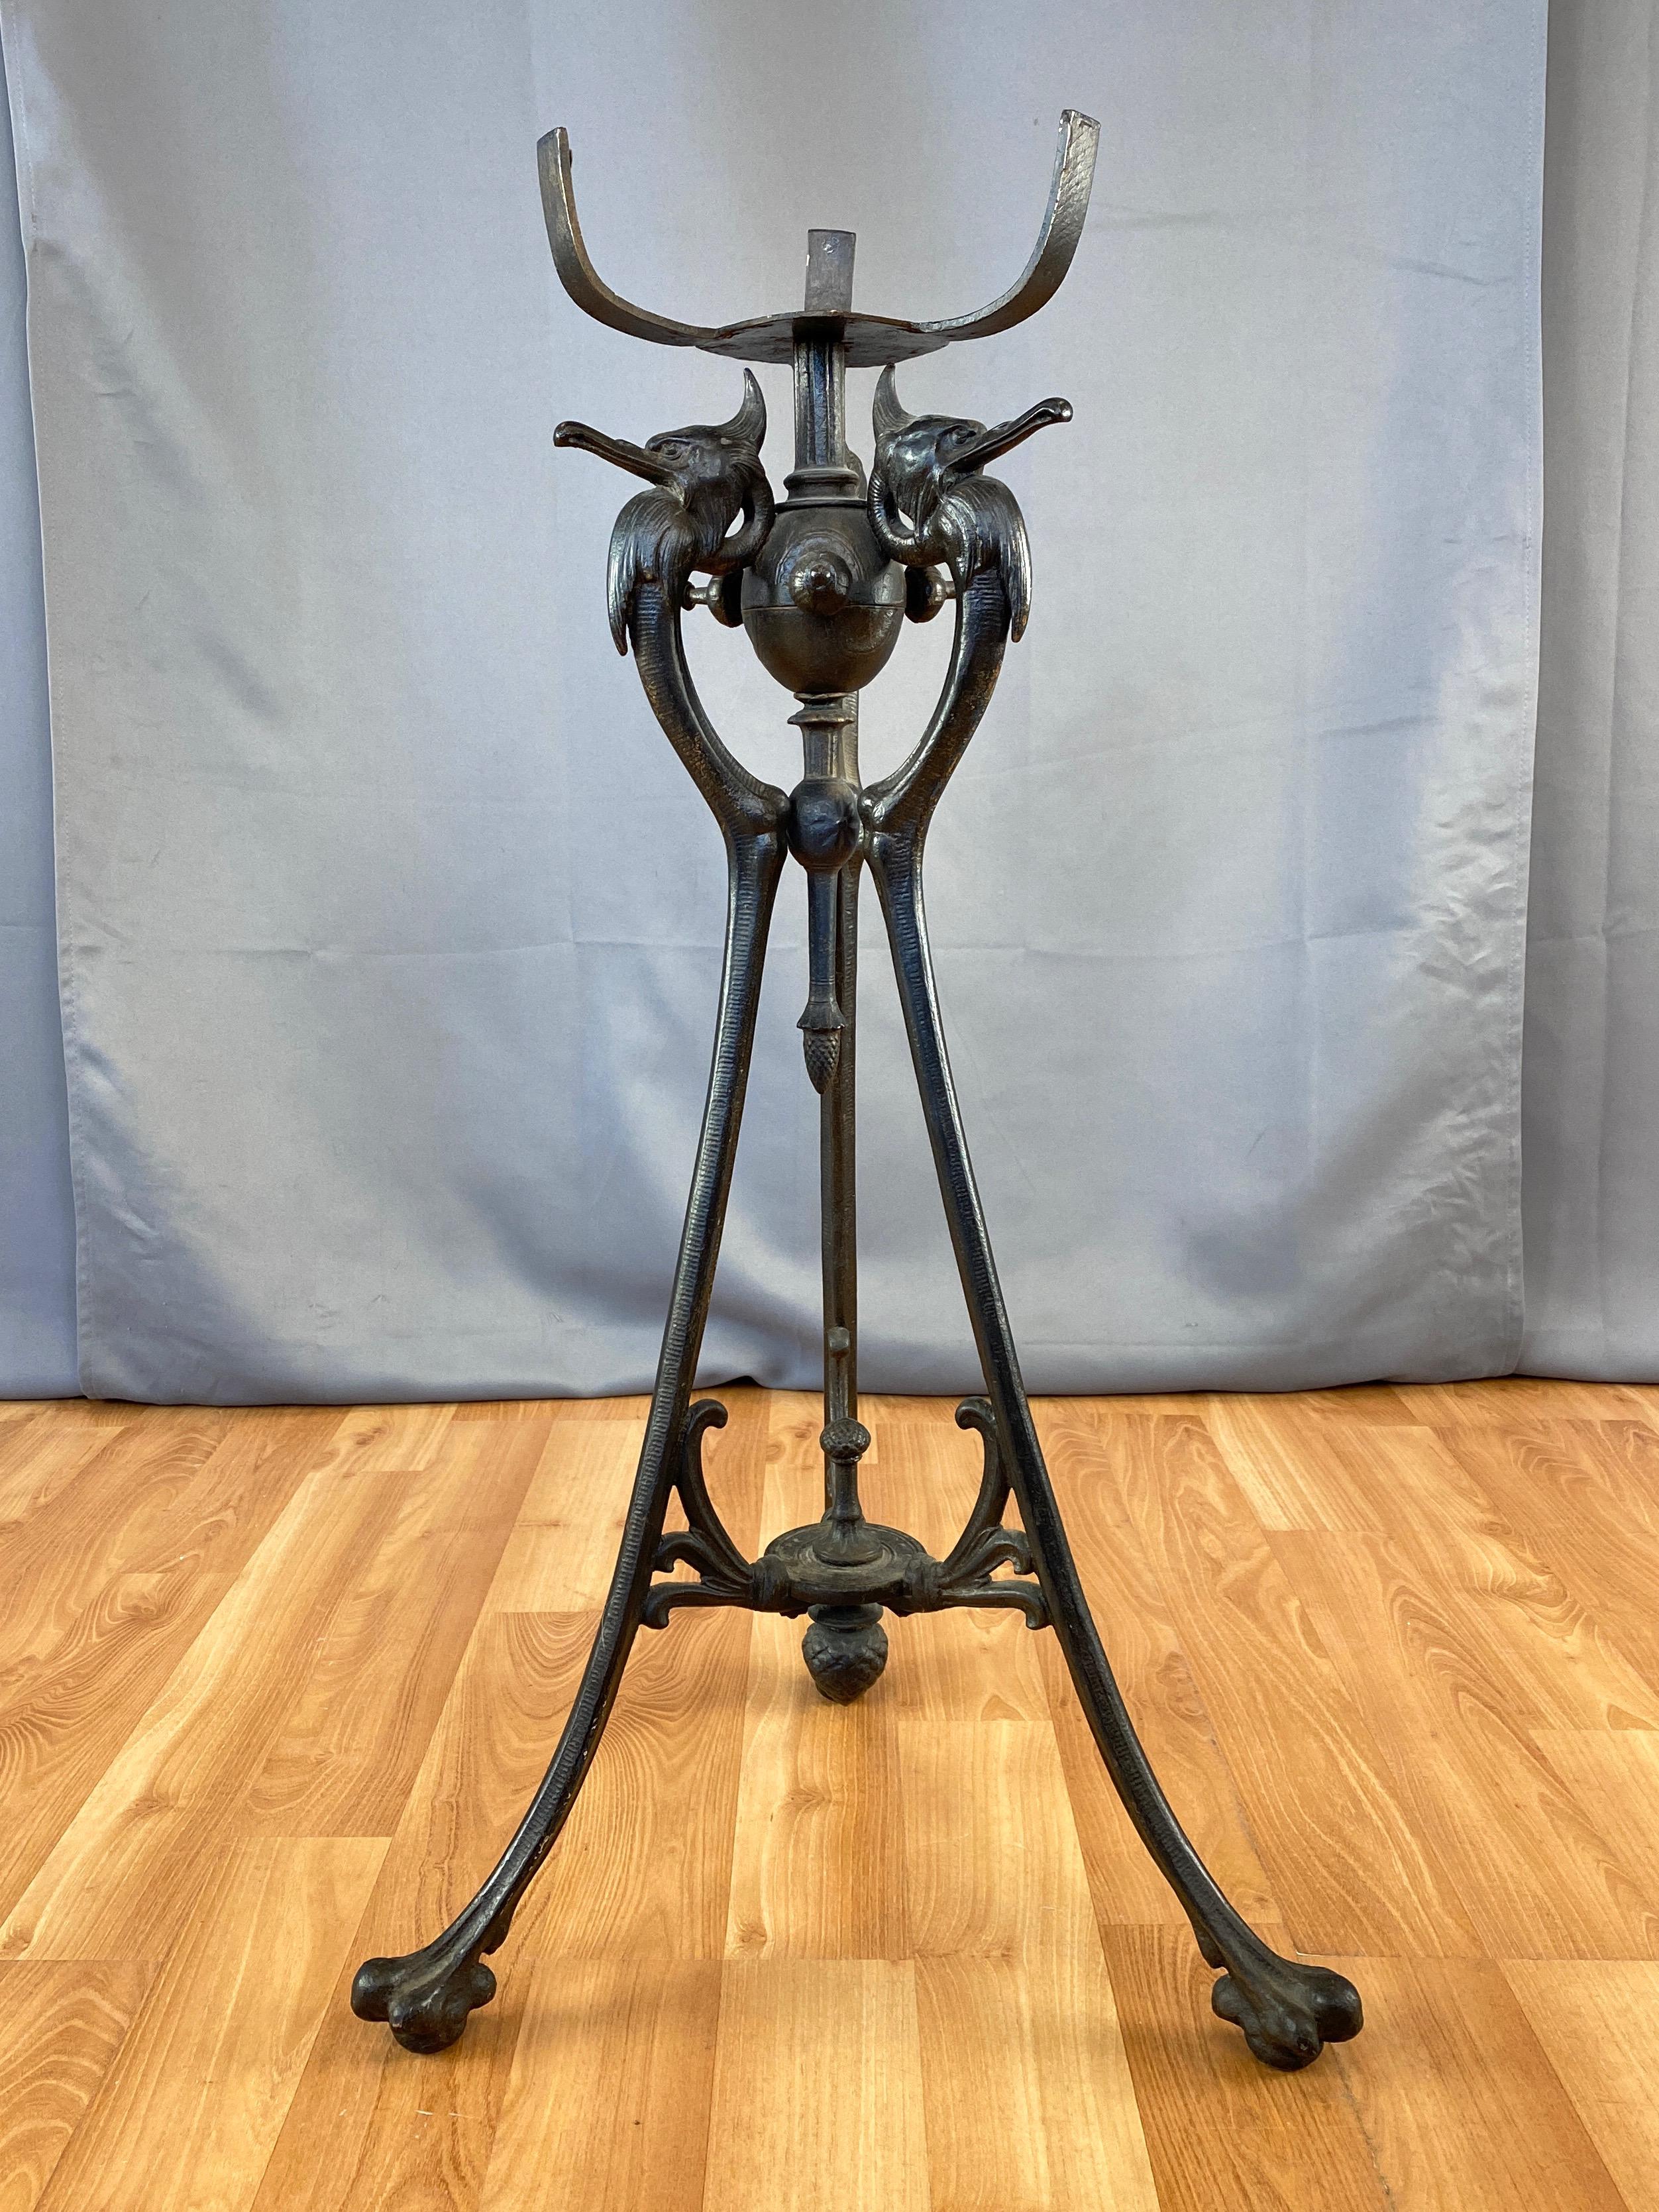 An artfully sculpted and striking circa 1890 late Victorian era cormorant-motif tall cast iron plant stand.

Distinguished by a handsome trio of proudly presenting birds with prominent plumage that appear to represent double-crested or great